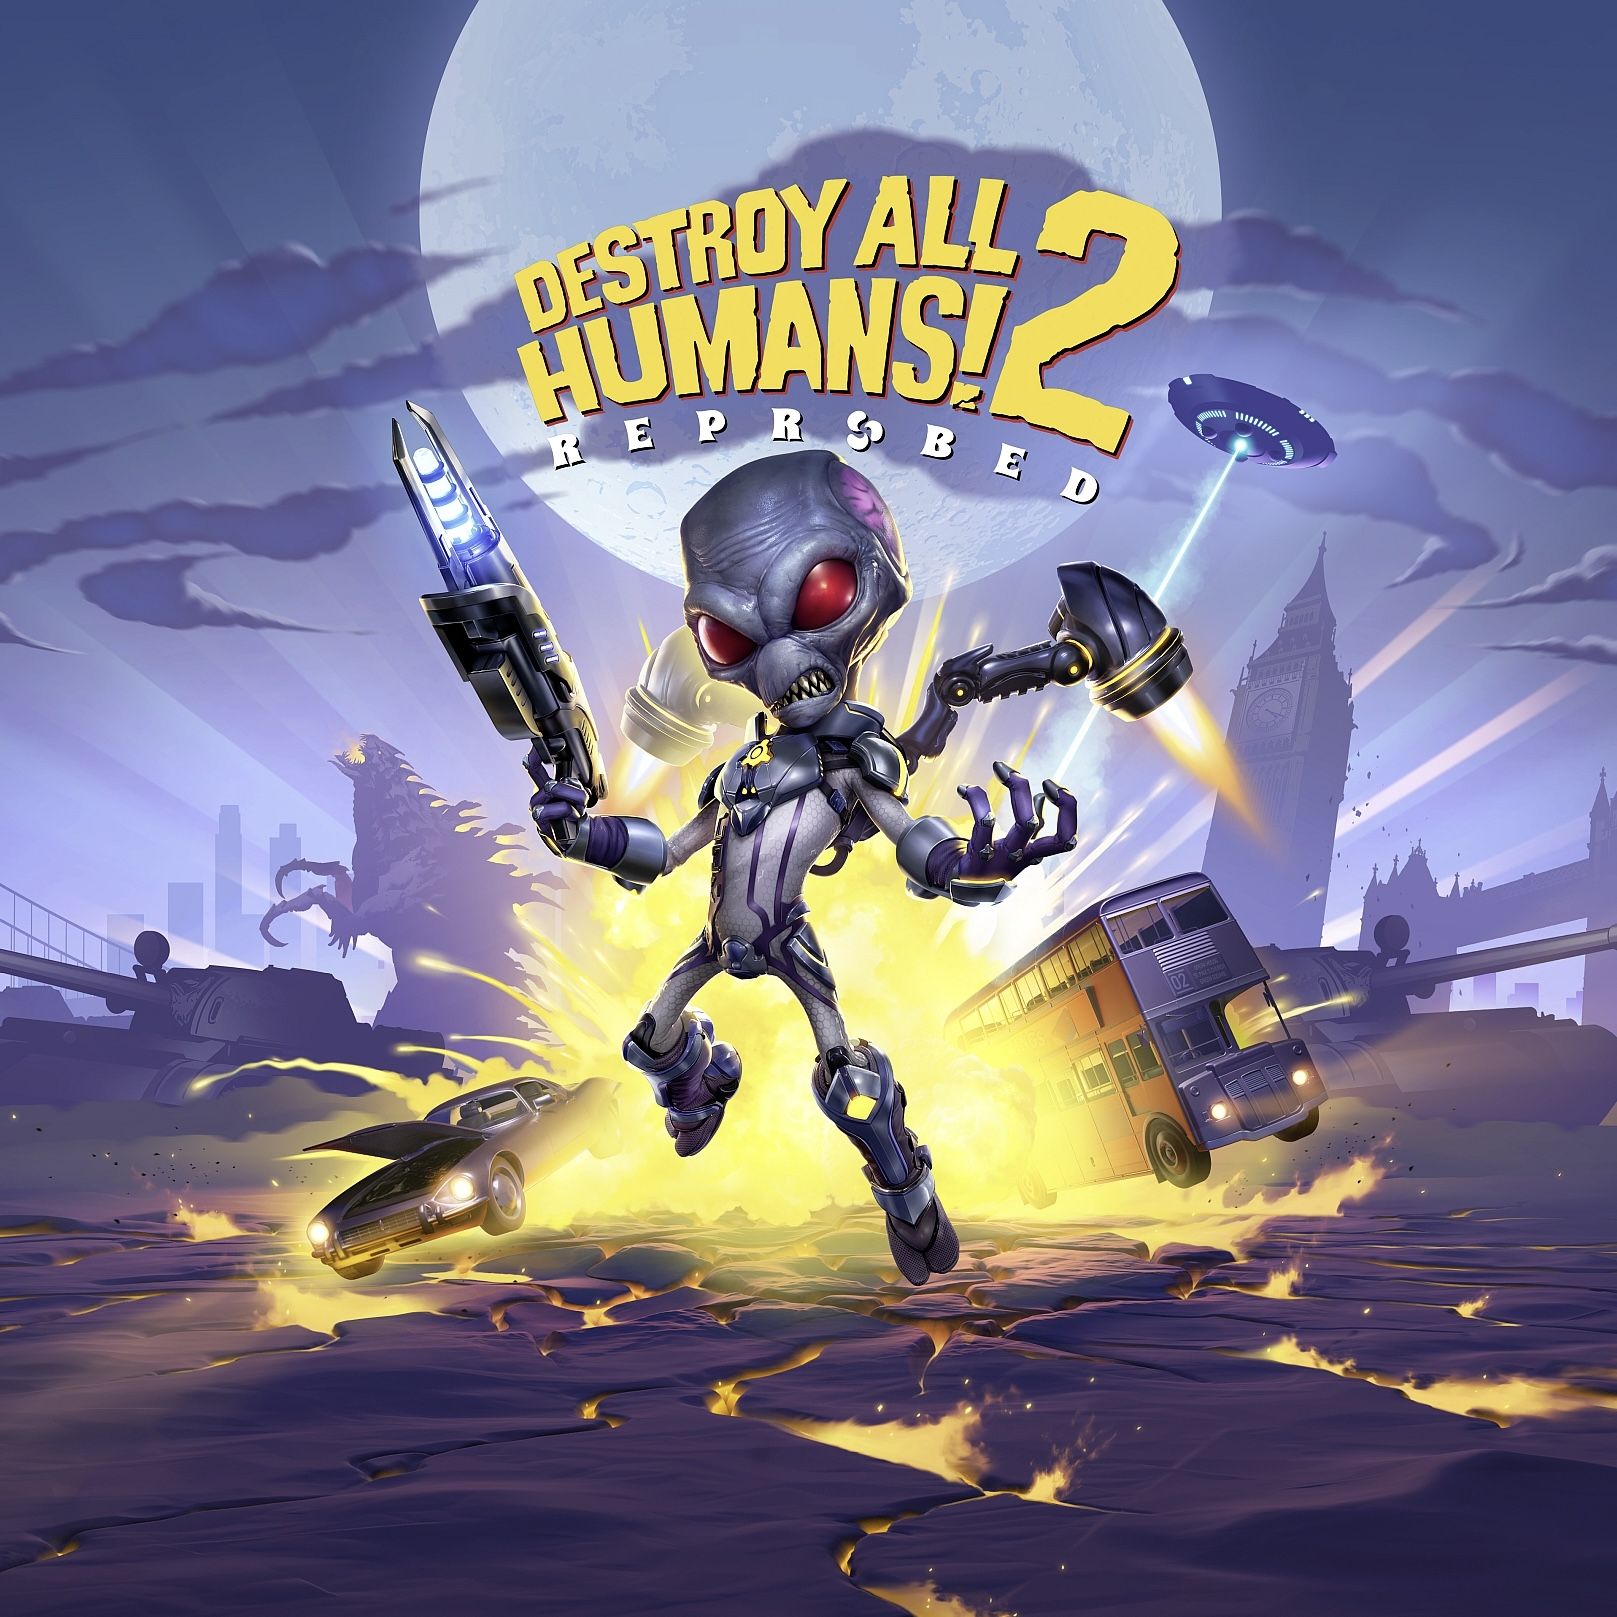 Destroy all Humans 2 reprobed. Destroy all Humans! 2 - Reprobed (ps5). Игры на ПС. Destroy all Humans!. Destroy all humans reprobed